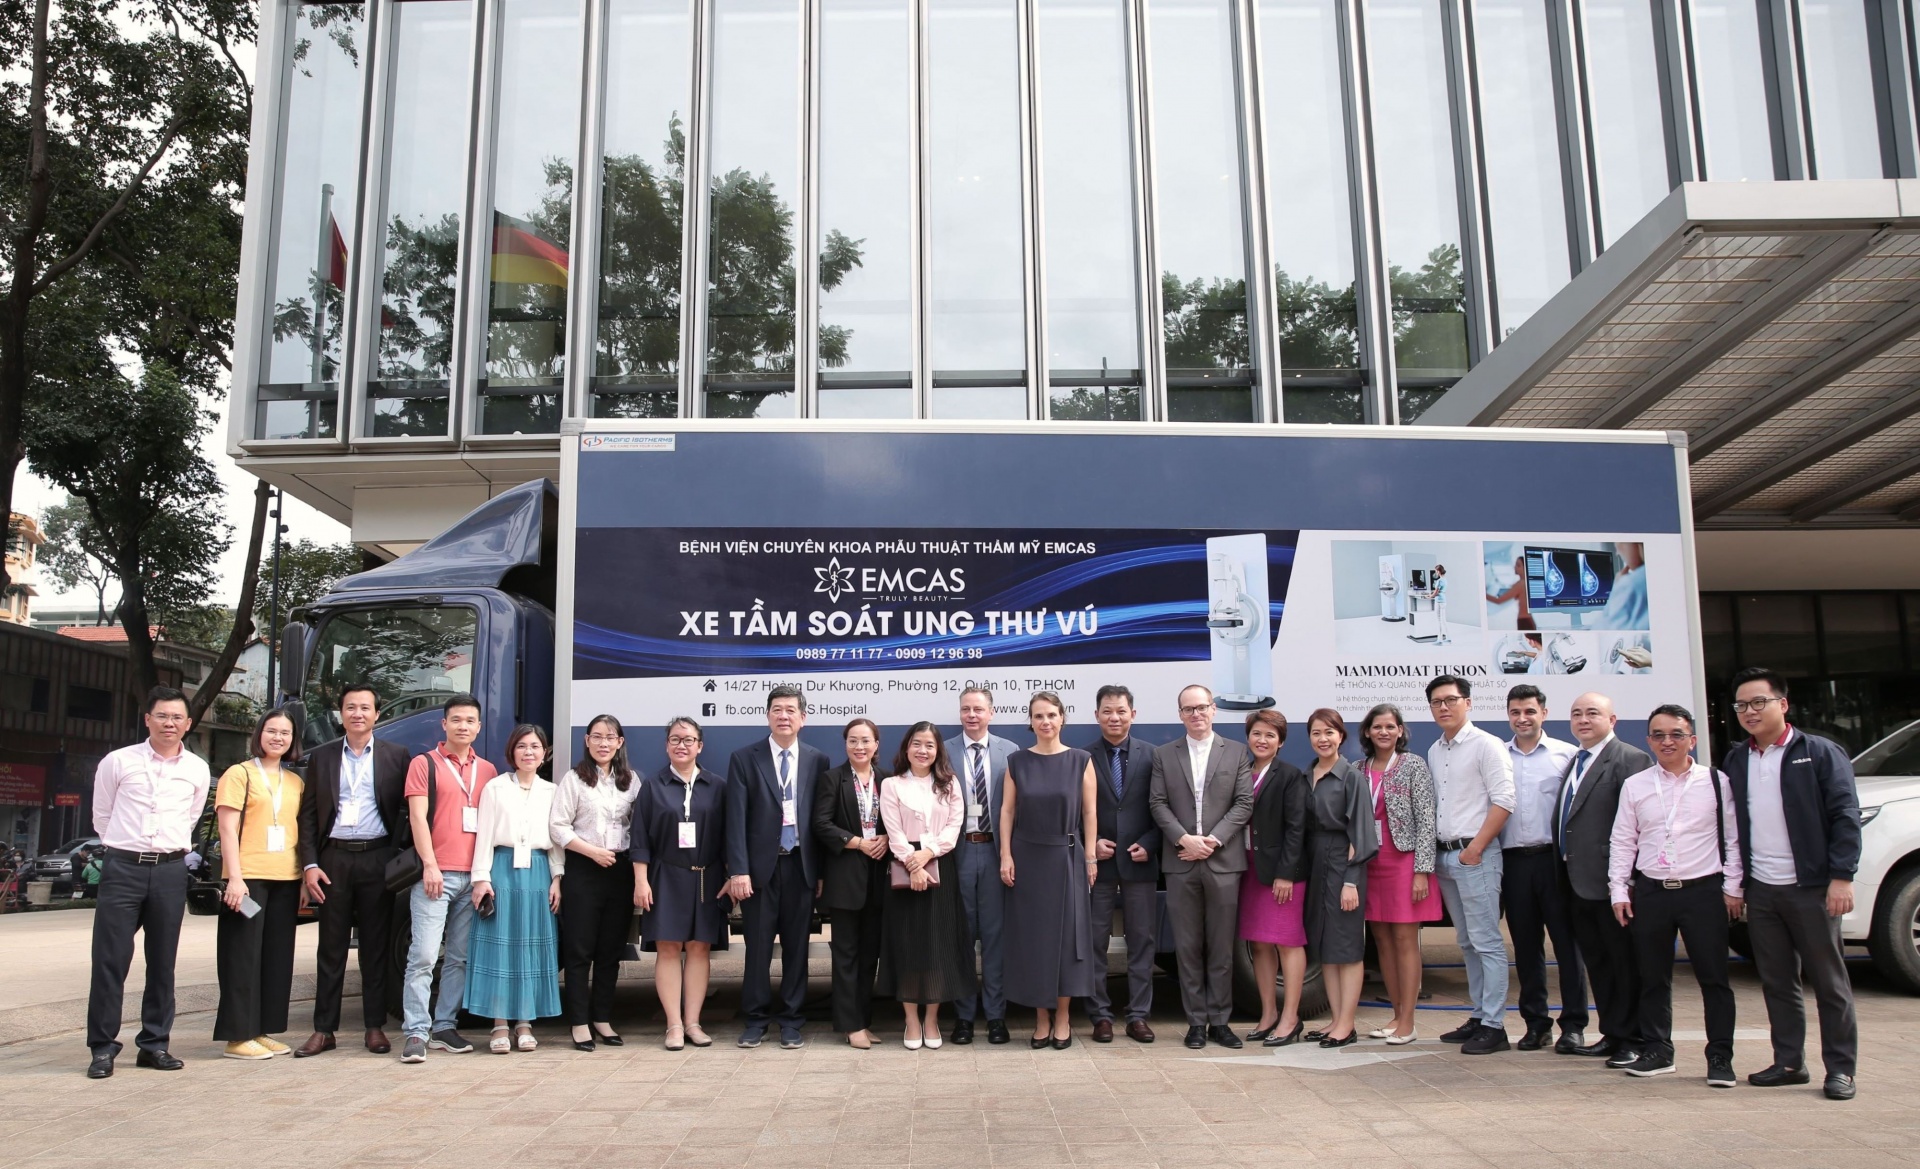 Mobile mammography truck to bring free breast cancer detection to Ho Chi Minh City